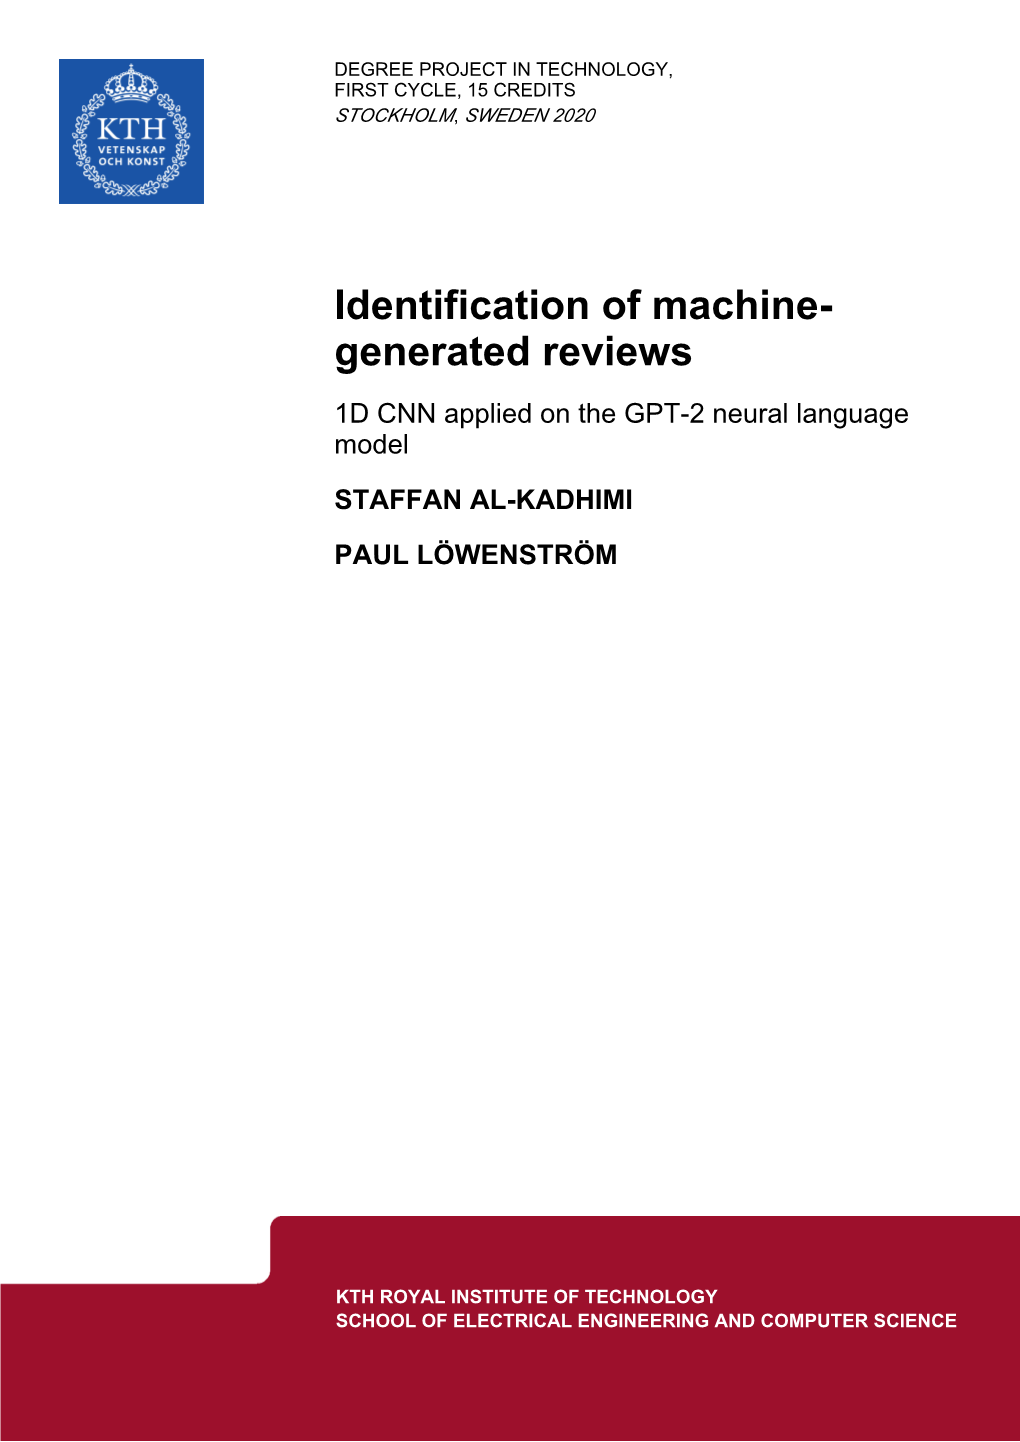 Identification of Machine- Generated Reviews 1D CNN Applied on the GPT-2 Neural Language Model